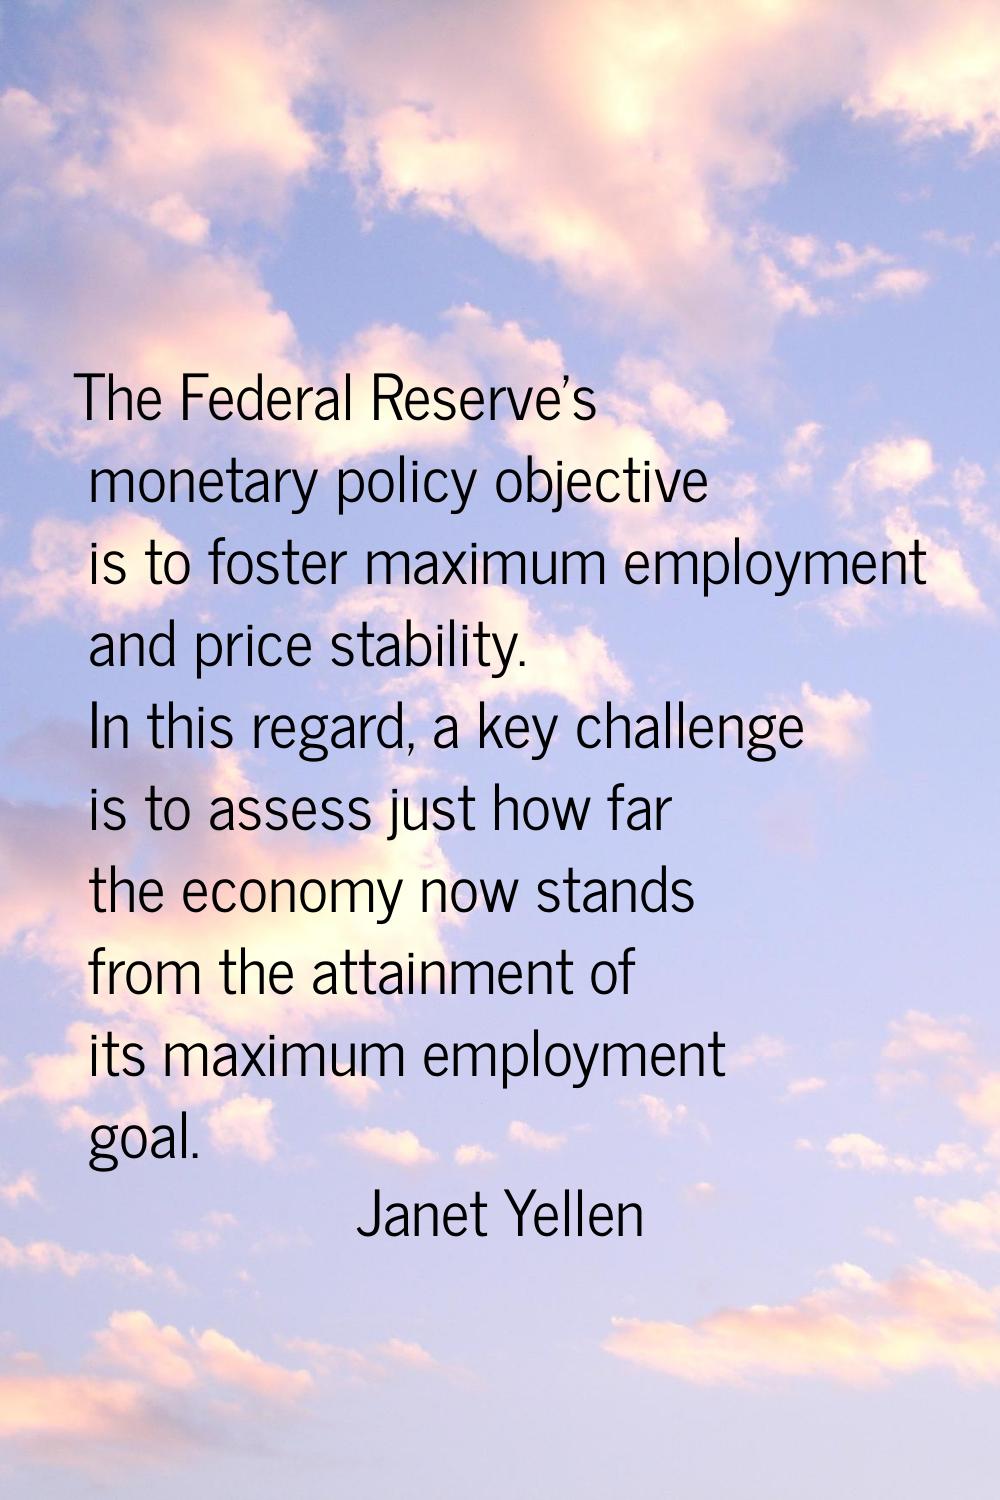 The Federal Reserve's monetary policy objective is to foster maximum employment and price stability